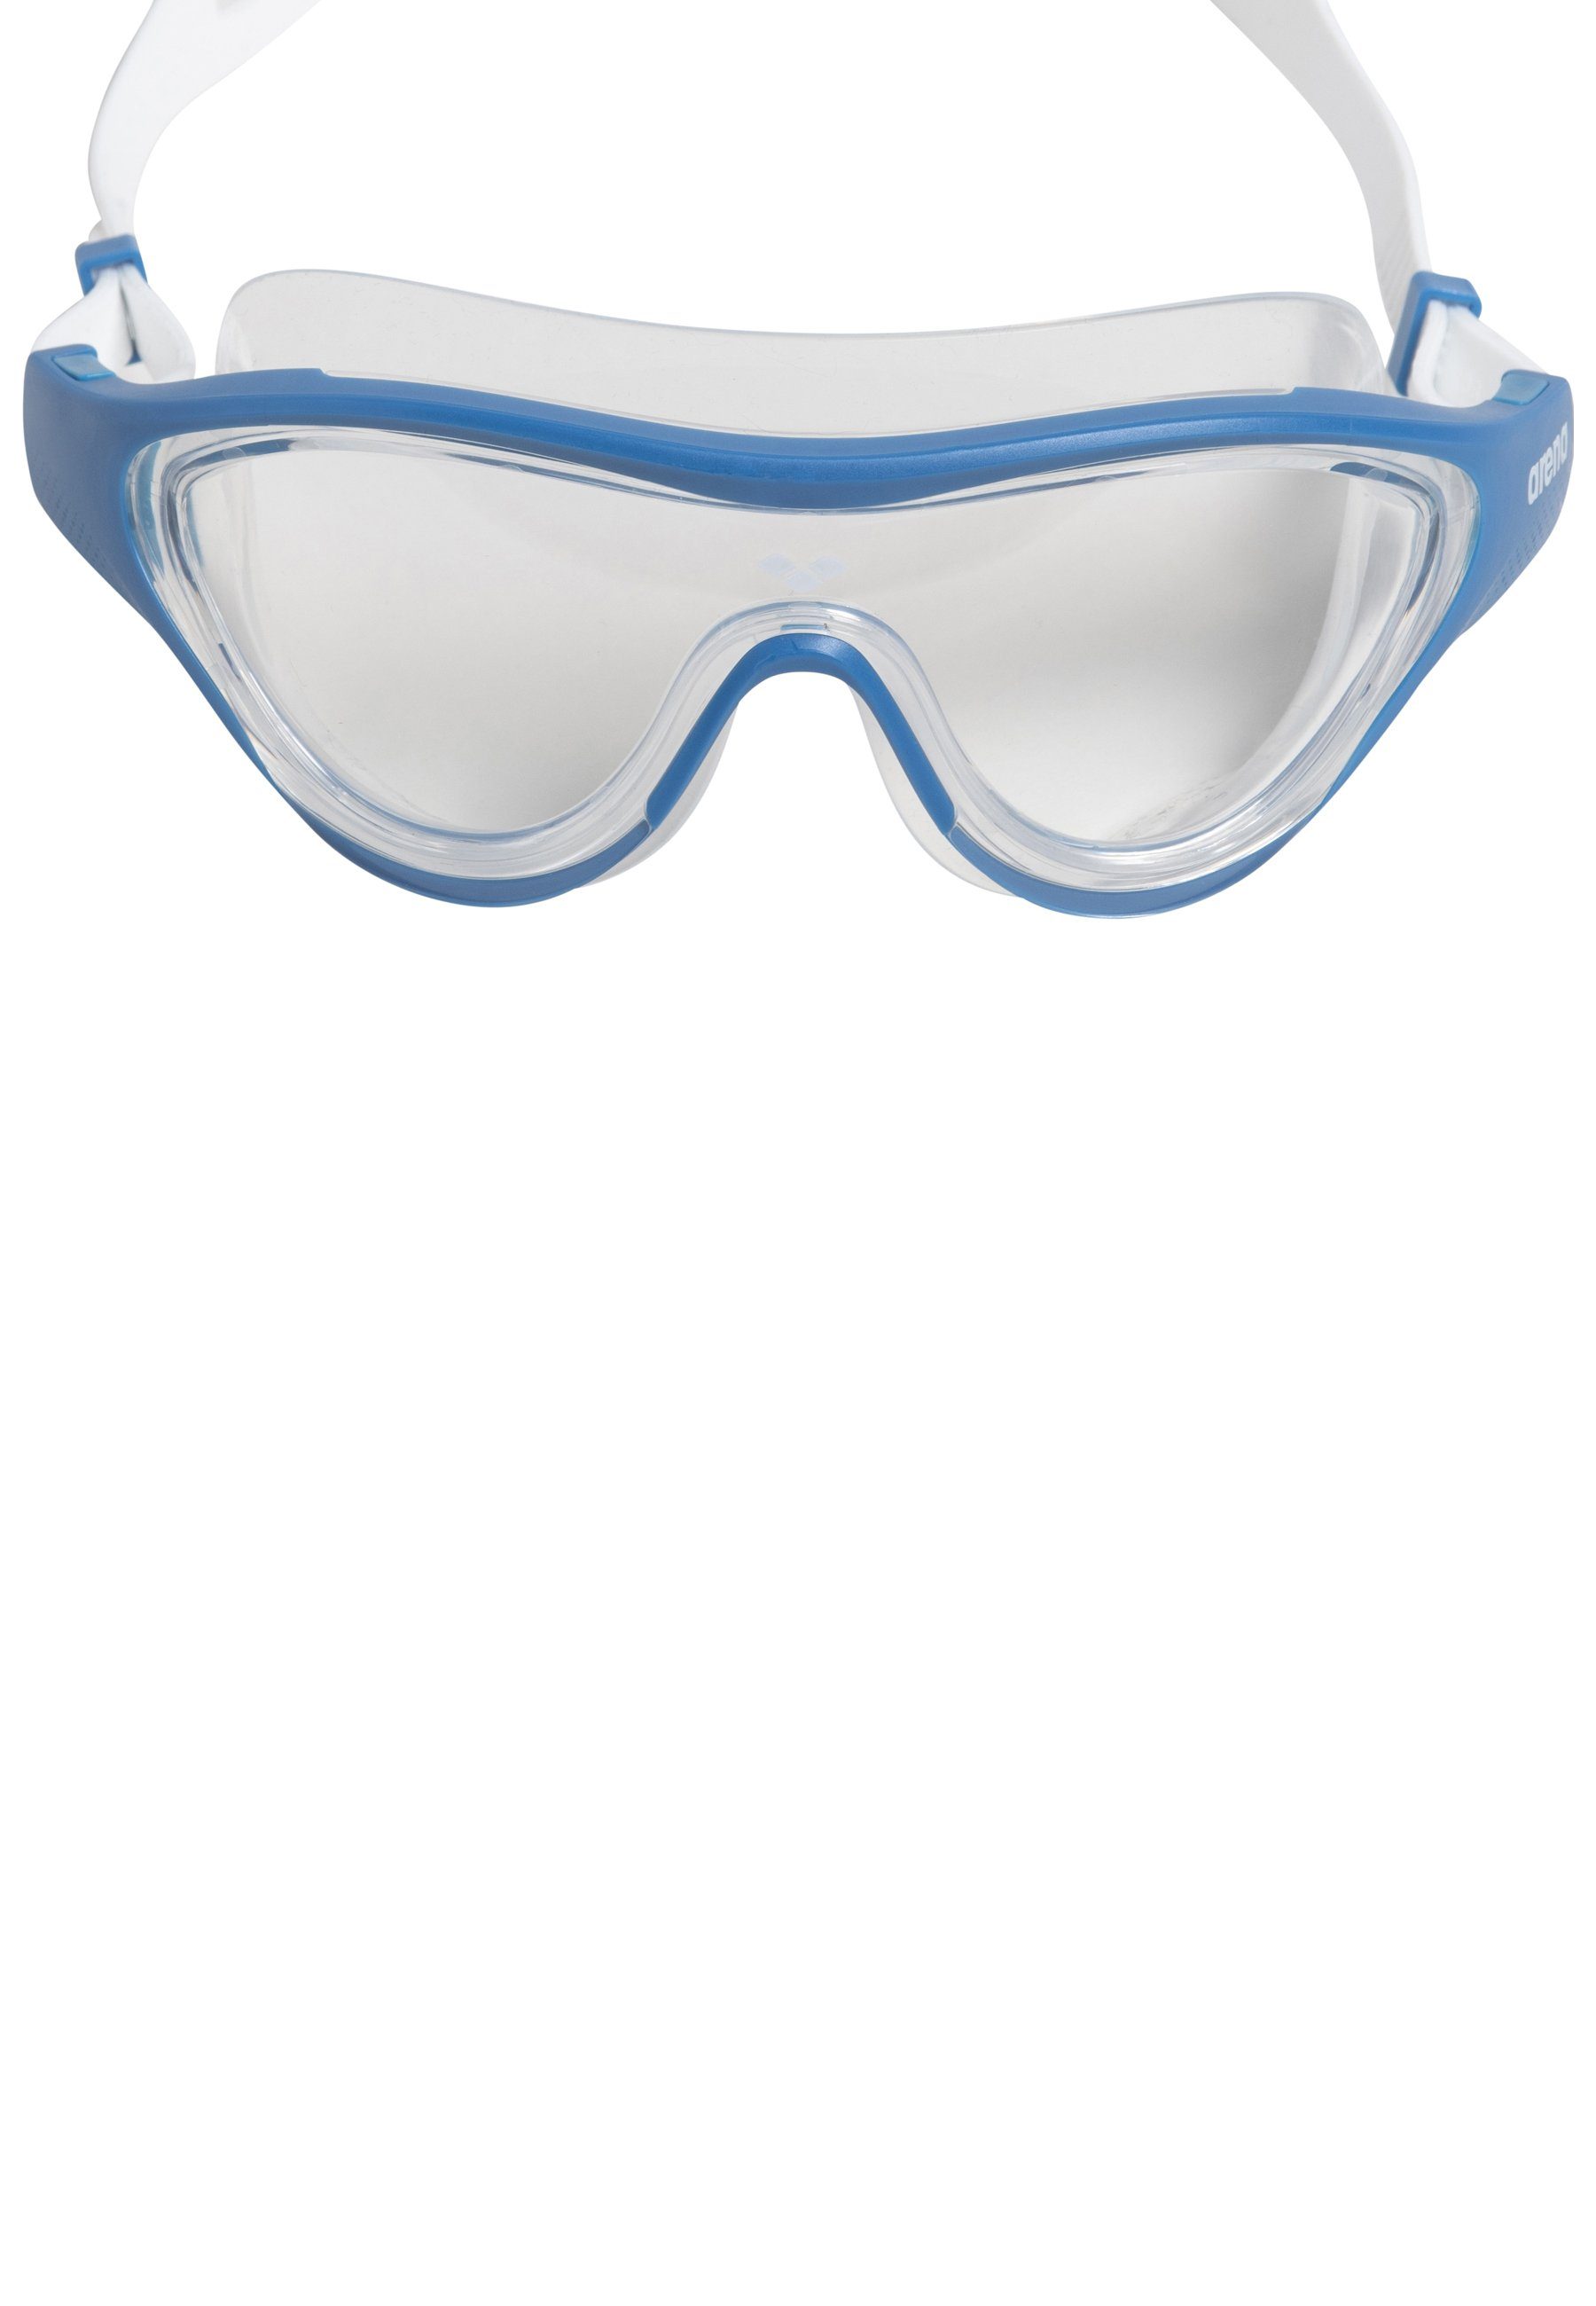 The Sportbrille Arena Mask clear-blue-white One